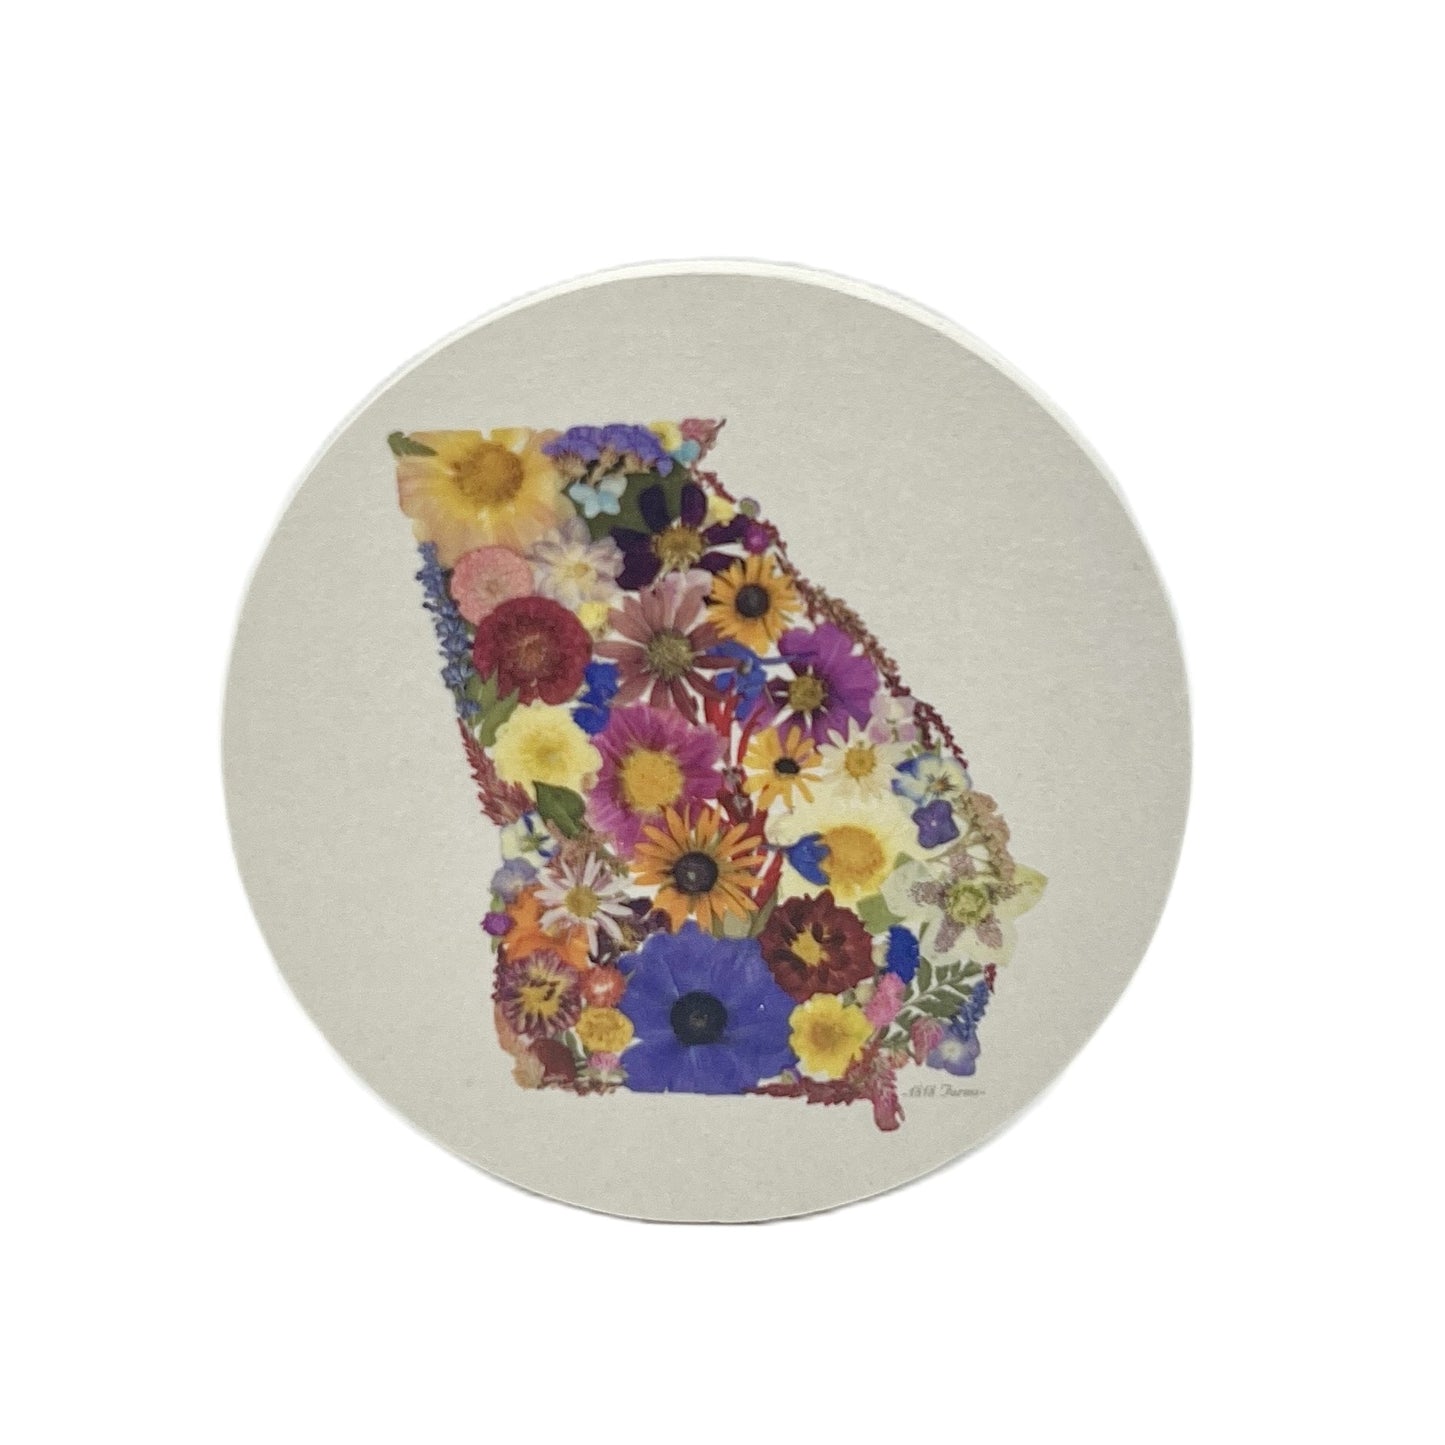 Georgia Themed Coasters (Set of 6) Featuring Dried, Pressed Flowers - "Where I Bloom" Collection Coaster 1818 Farms   